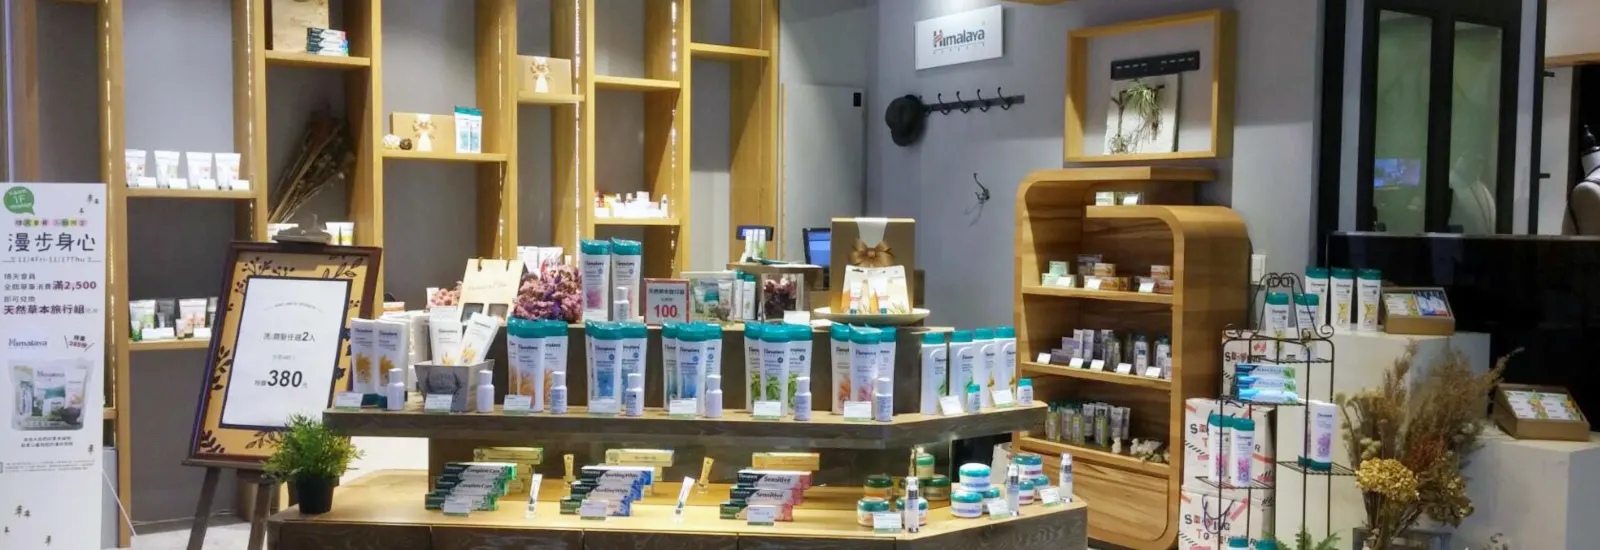 Products in store - The Himalaya Drug Company